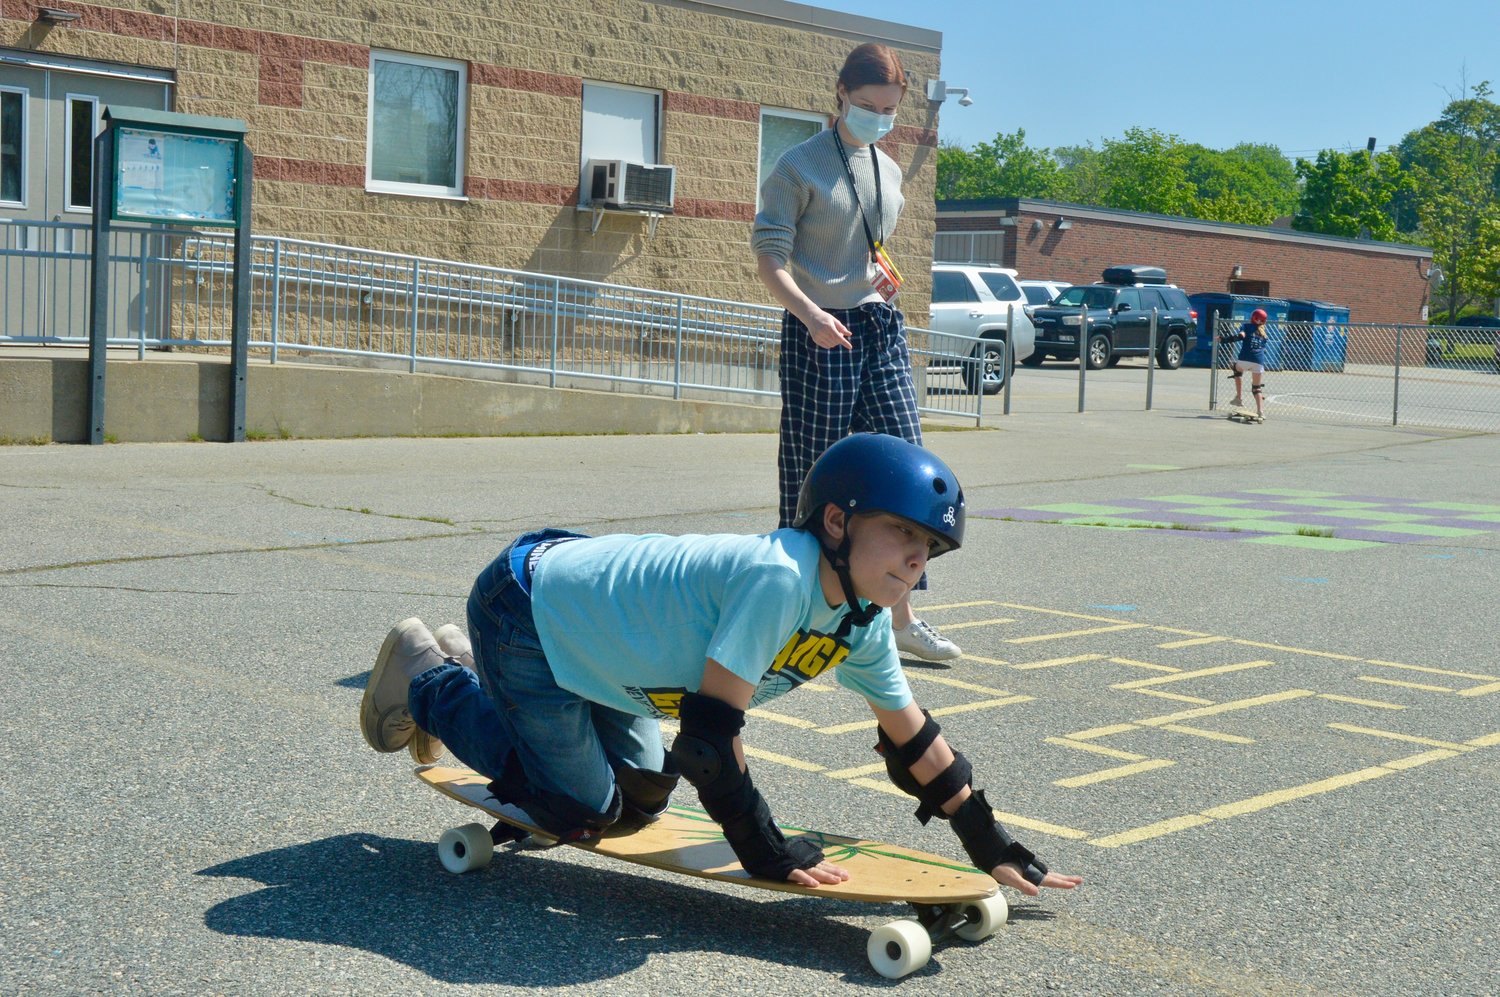 Aiden, a fourth-grader at Melville School, preferred to ride low to the ground on his longboard. Looking on is teacher’s aid Kaitlin Powell.